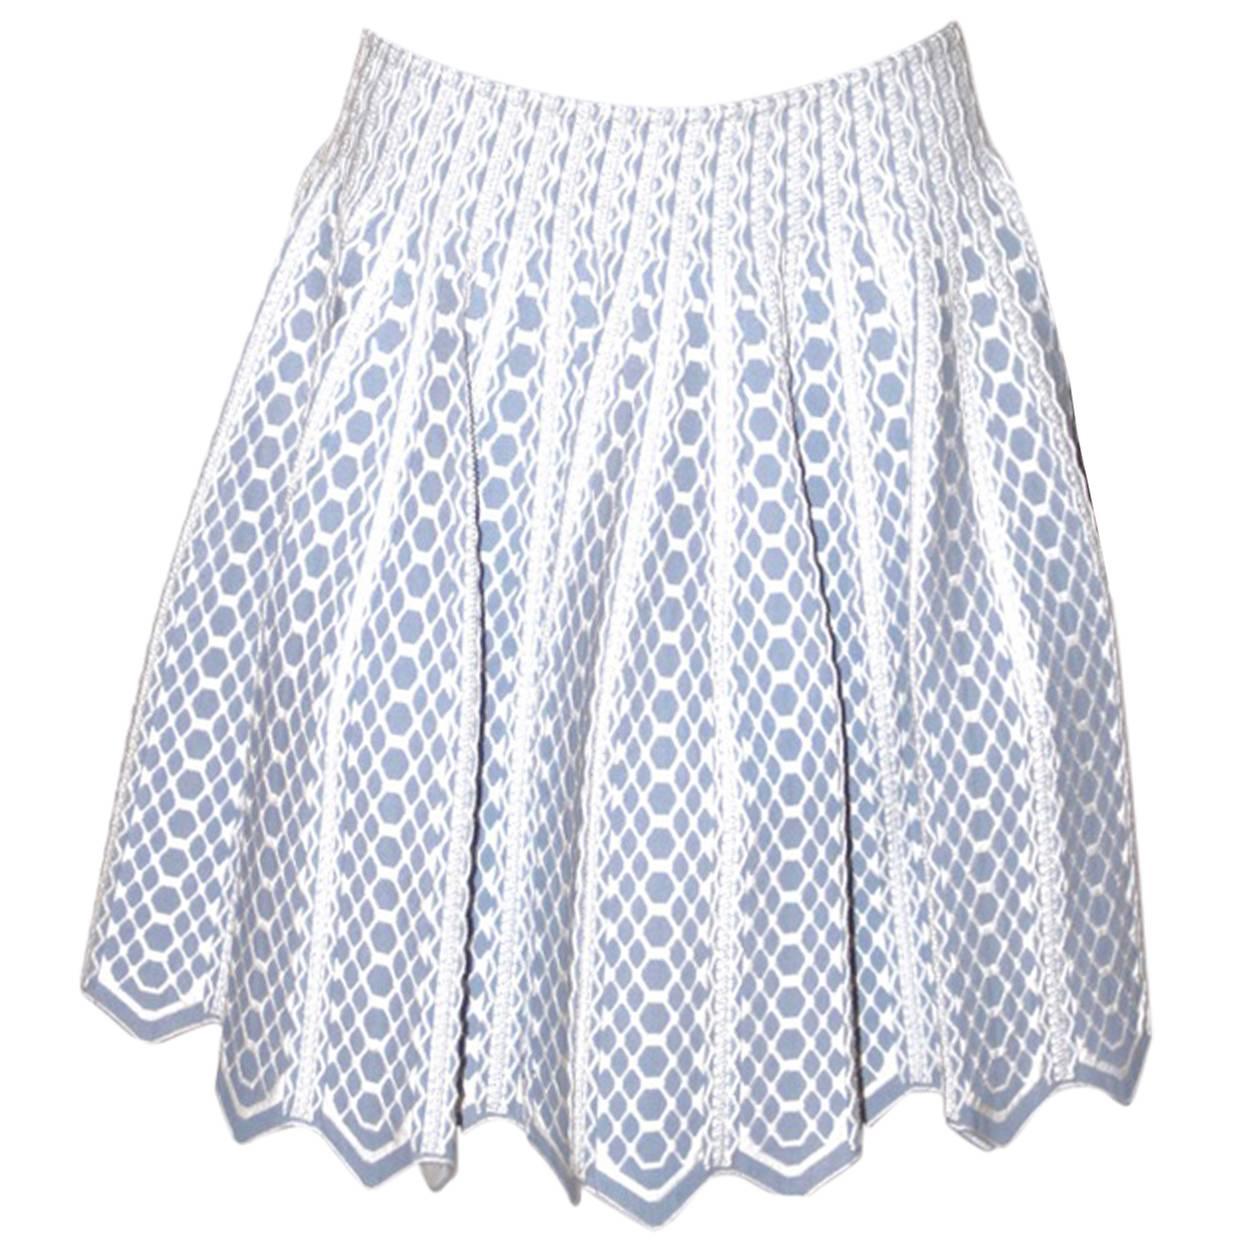 Alaia Flared Skirt - Light Blue and White Knit - Honeycomb Pattern - FR 42